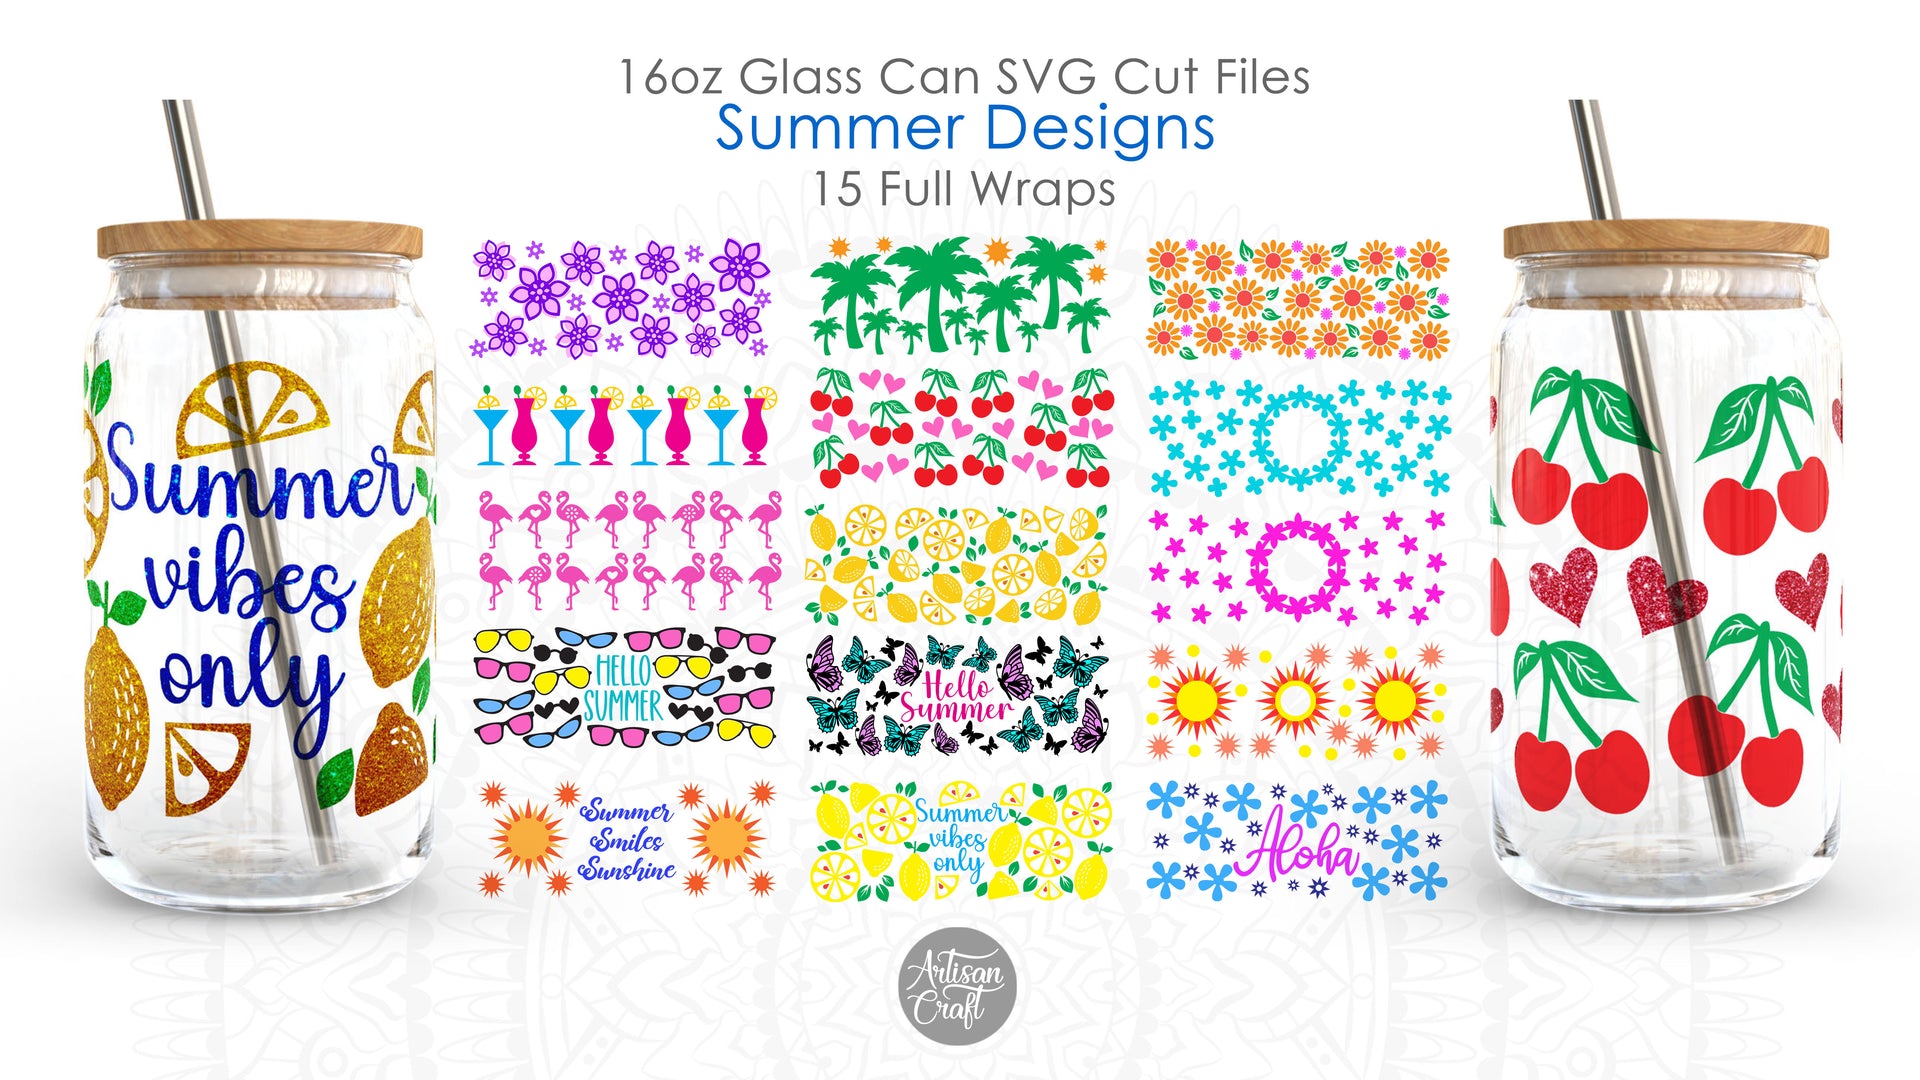 Load video: The 16oz Glass can SVG cut file bundle show summer inspired designs.